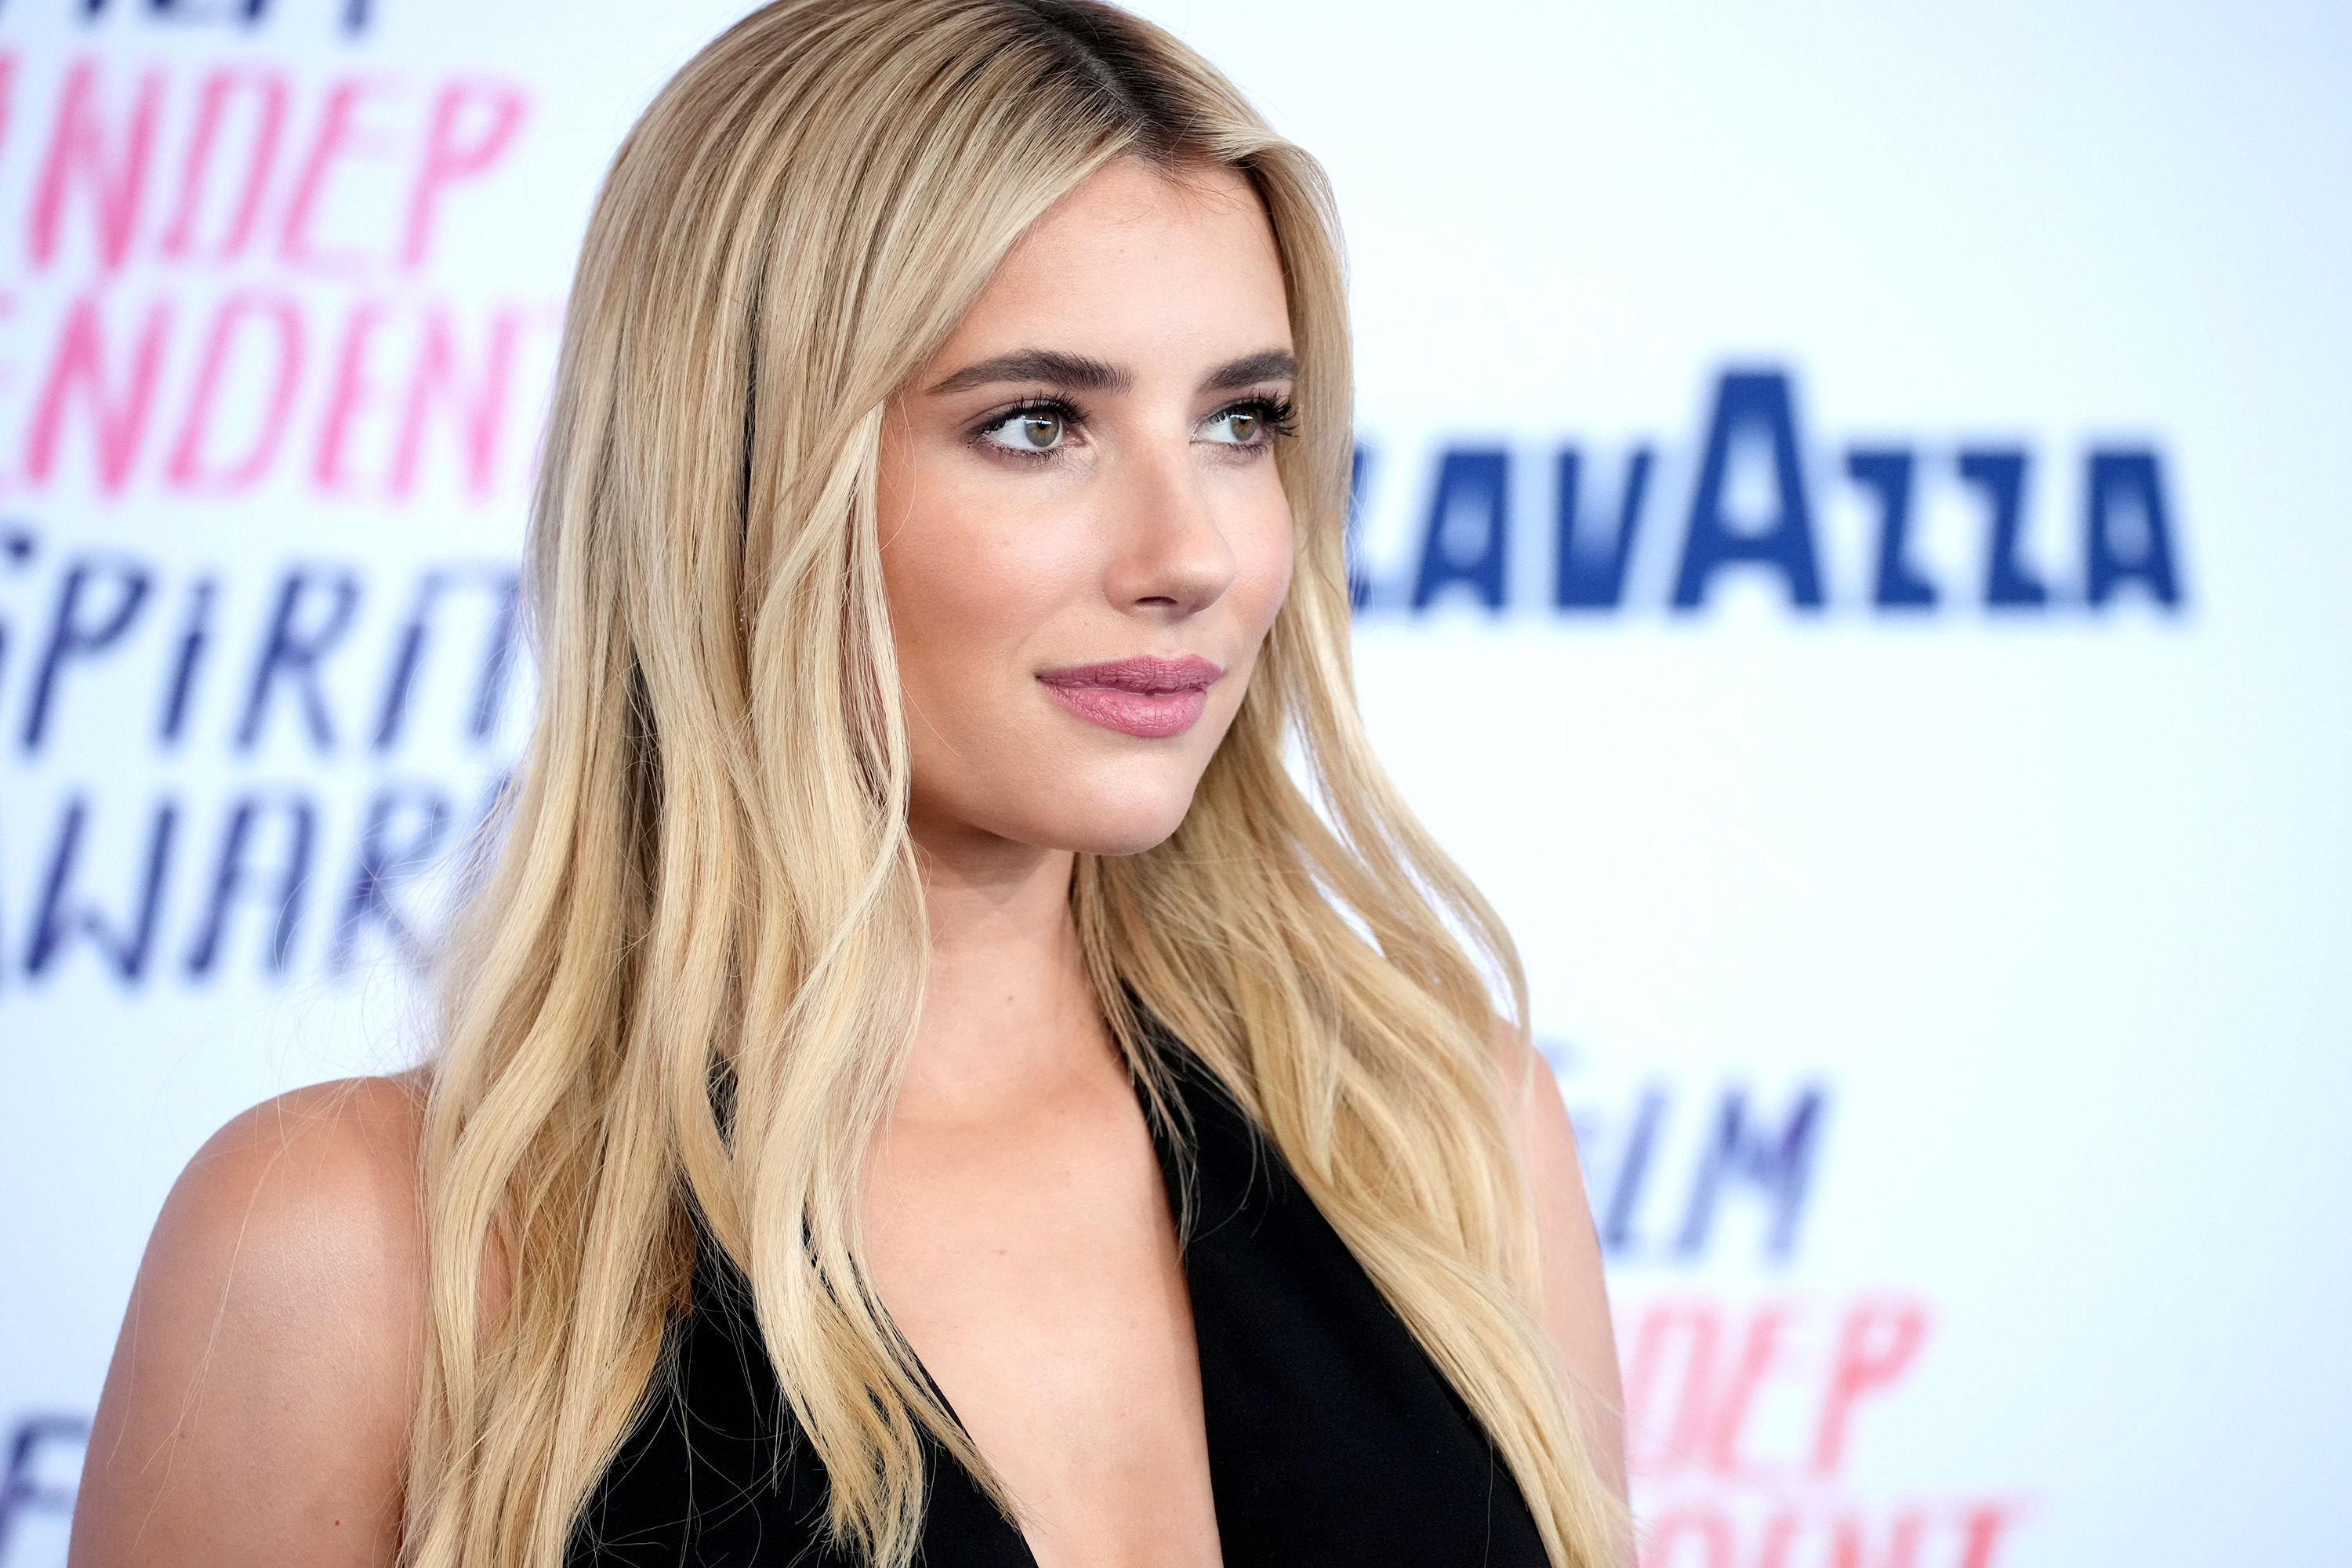 Emma Roberts posing on the red carpet, wearing a sleeveless black dress with a plunging neckline at an event